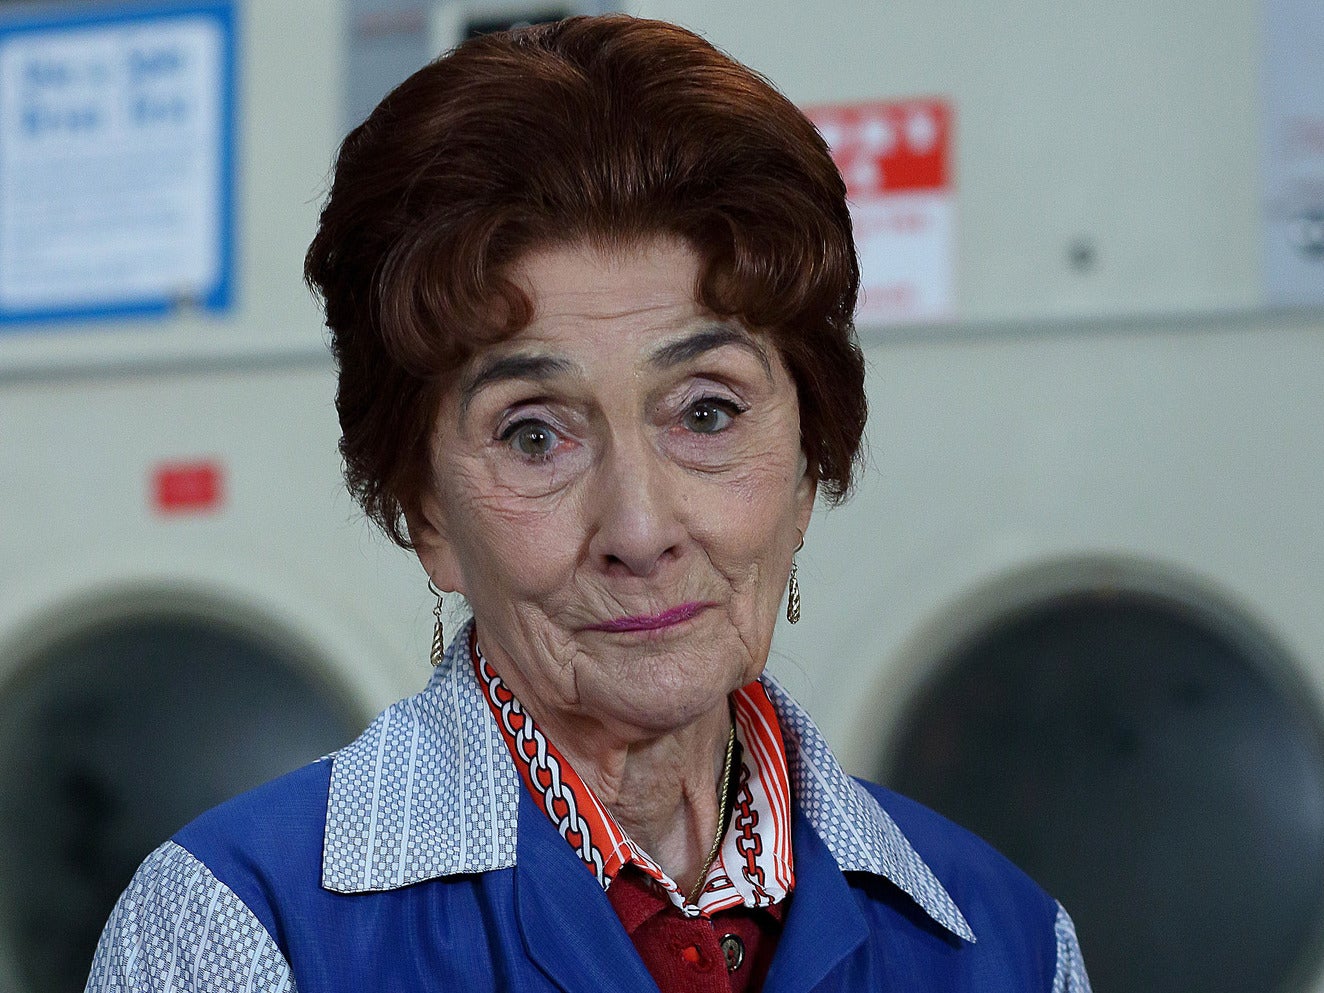 Dot Branning (June Brown) will be among the characters to pay tribute to the Royal baby in the next episode of EastEnders